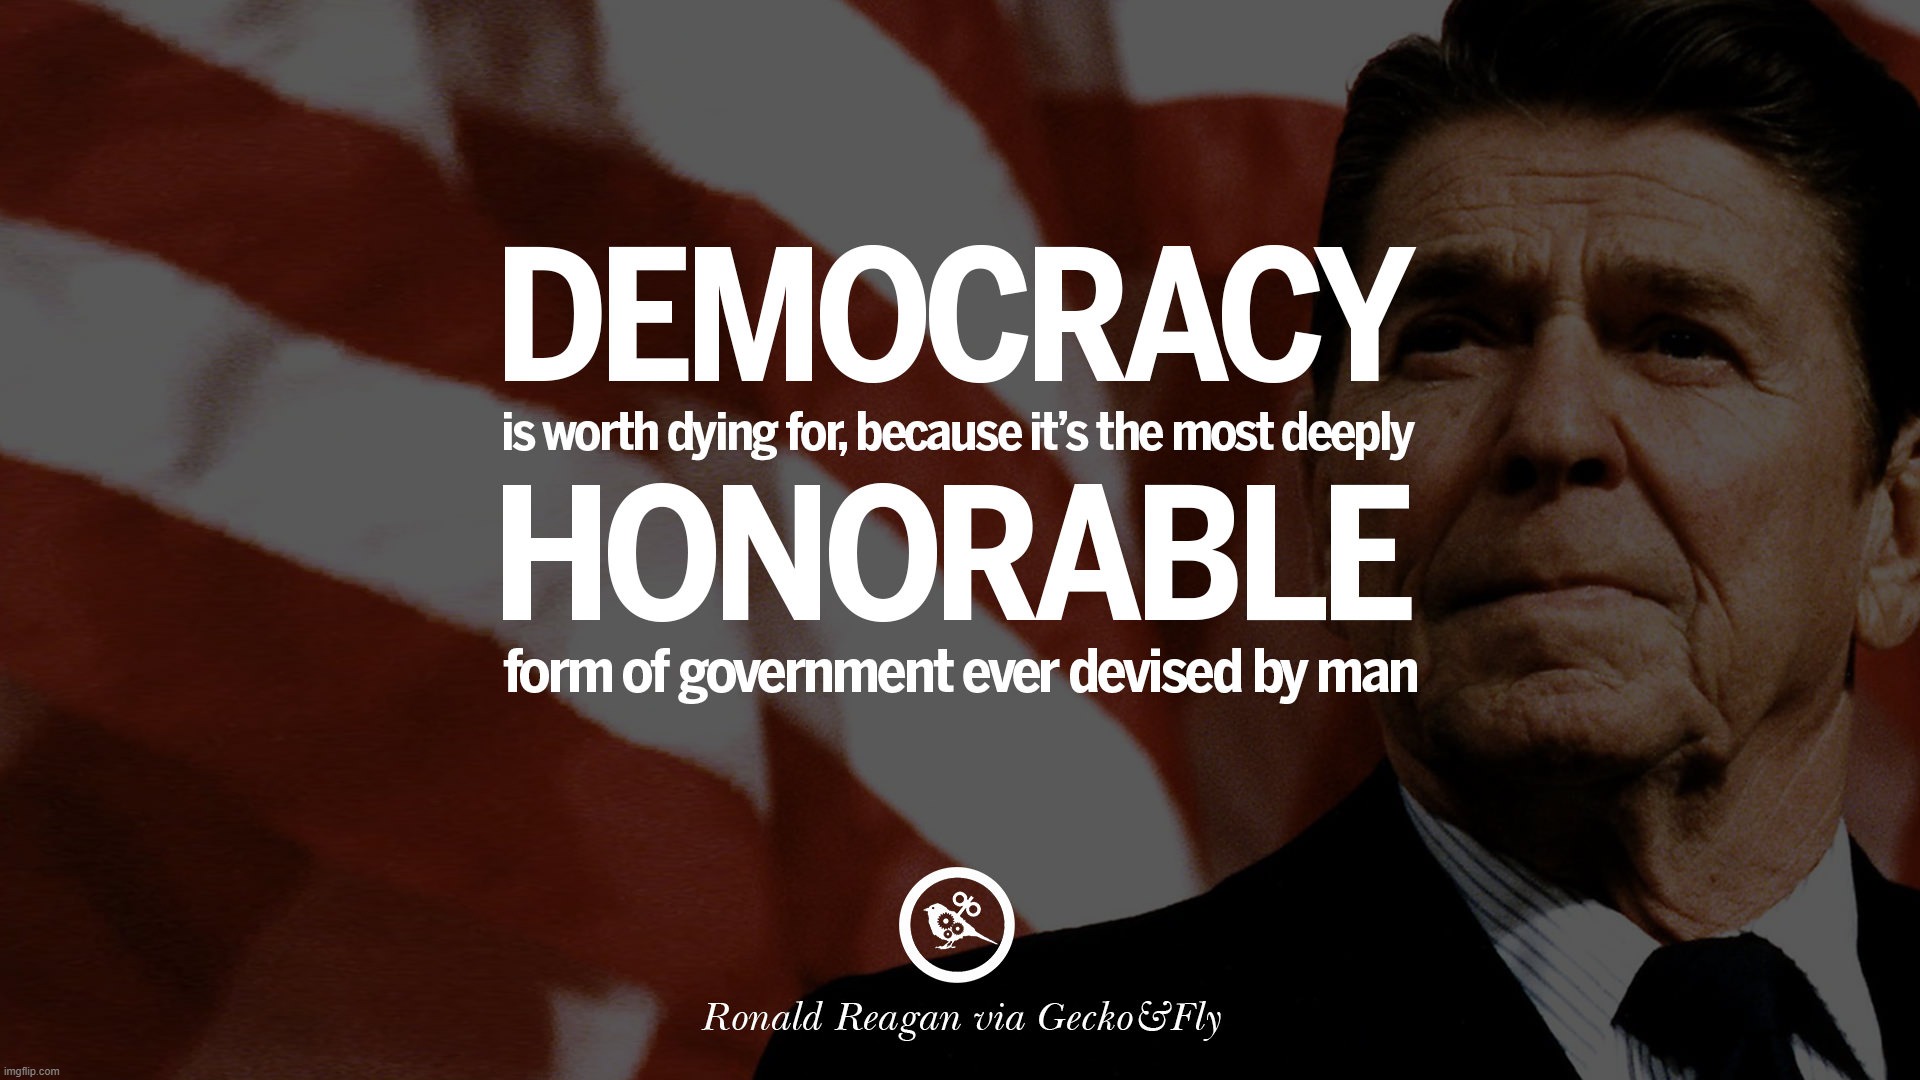 Ronald Reagan quote democracy | image tagged in ronald reagan quote democracy | made w/ Imgflip meme maker